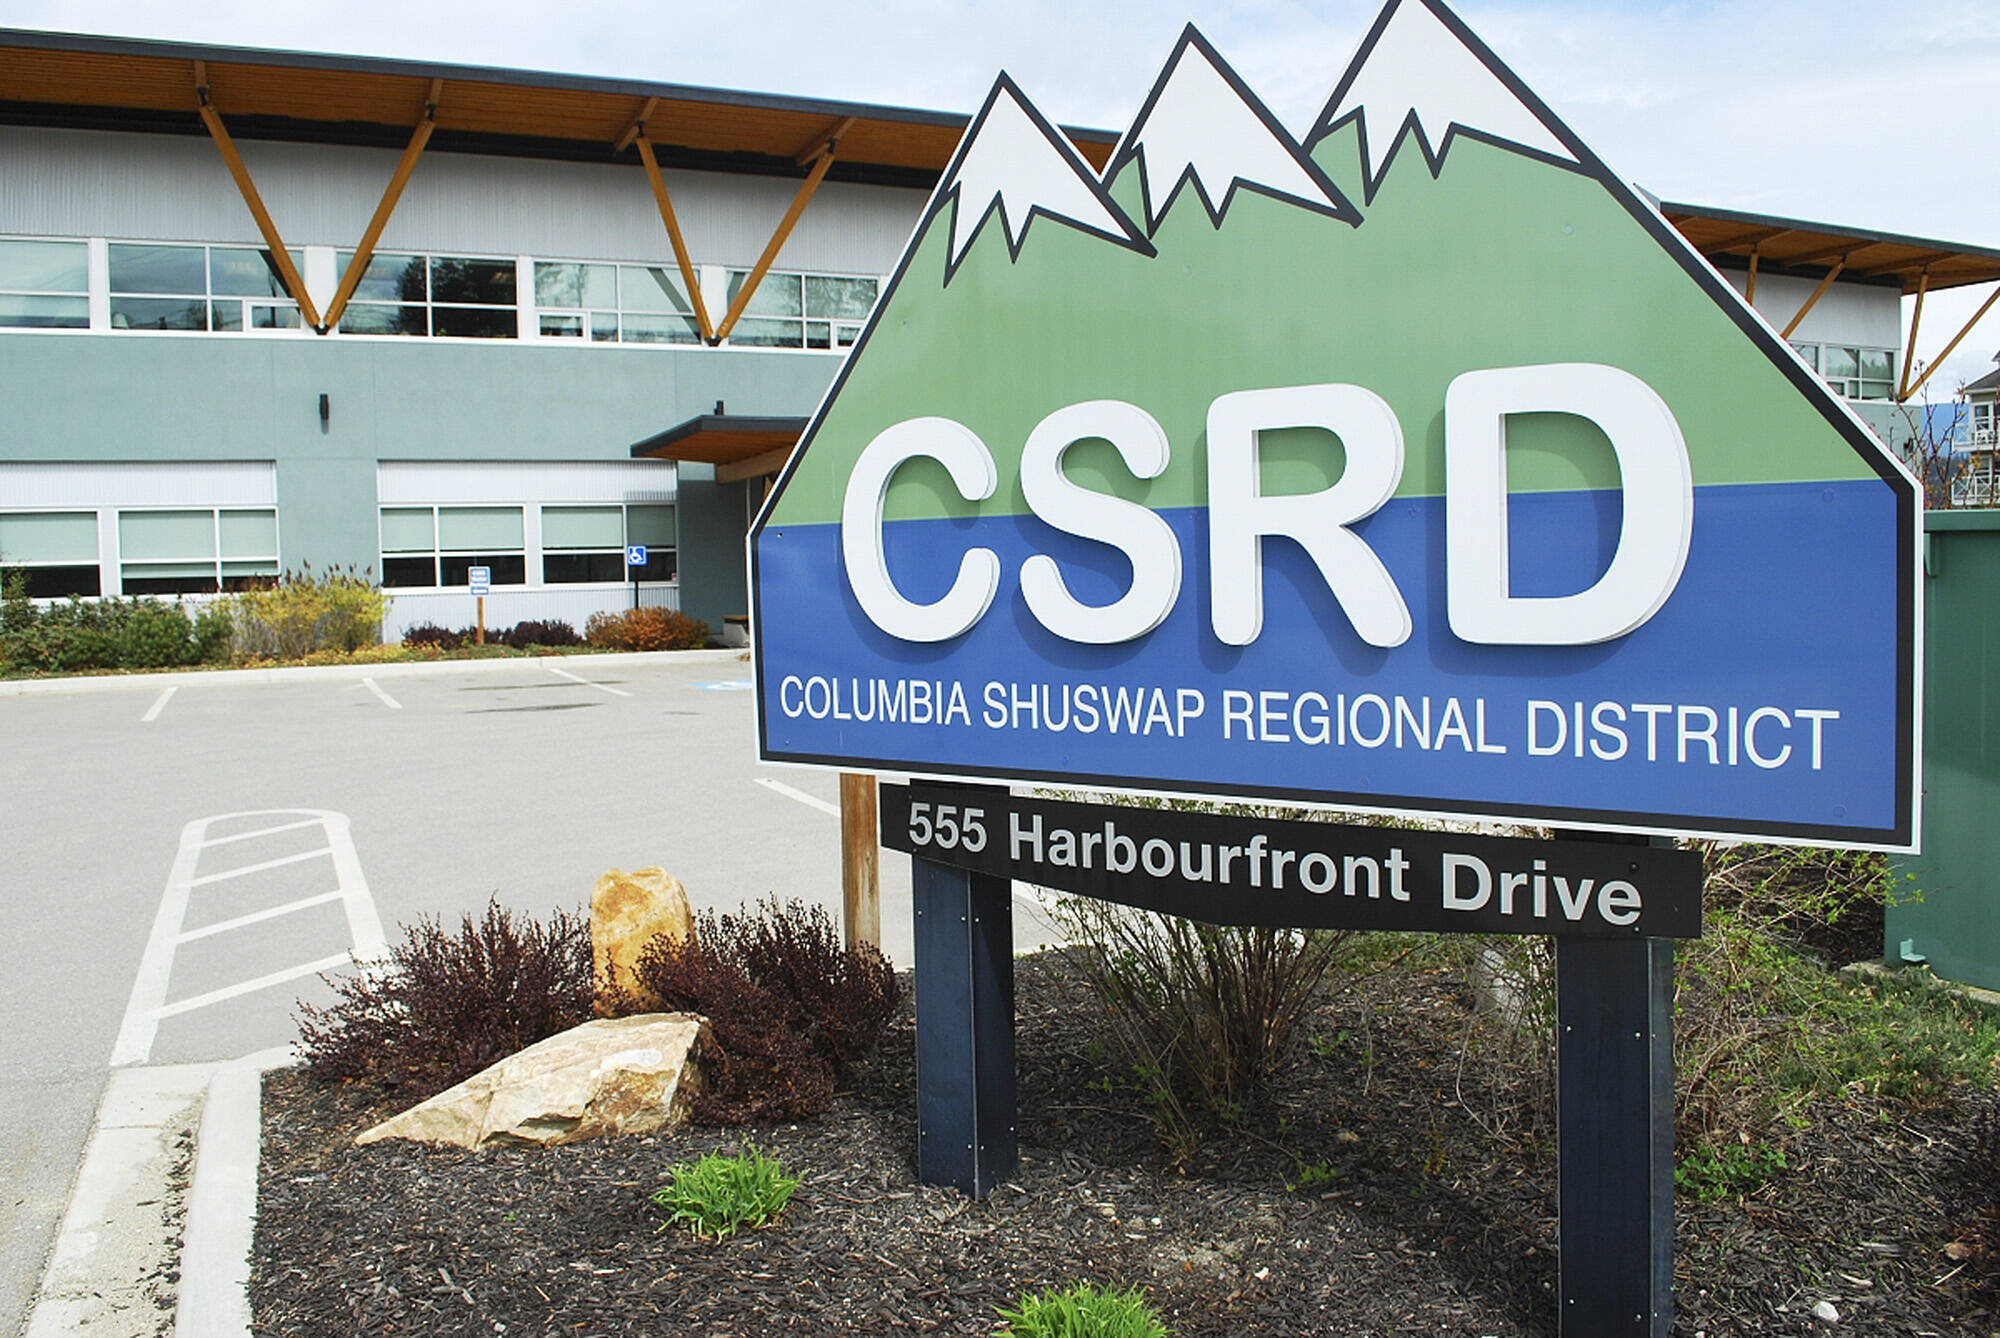 A mandatory vaccination policy is on the agenda for the Columbia Shuswap Regional District board meeting on Nov. 18, 2021. (File photo)